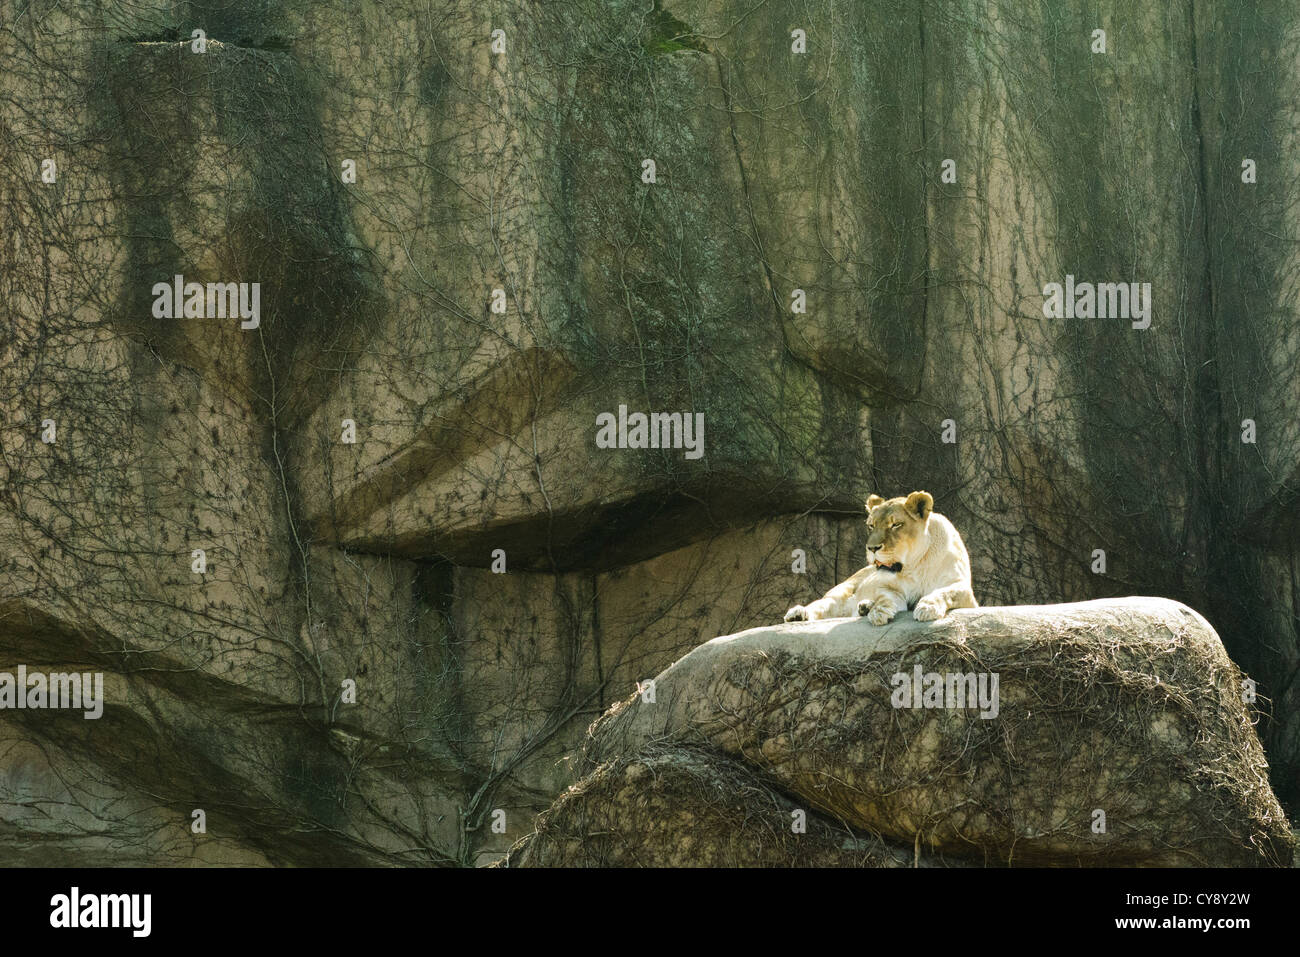 Lioness lying on a rock, Lincoln Park Zoo Chicago Stock Photo